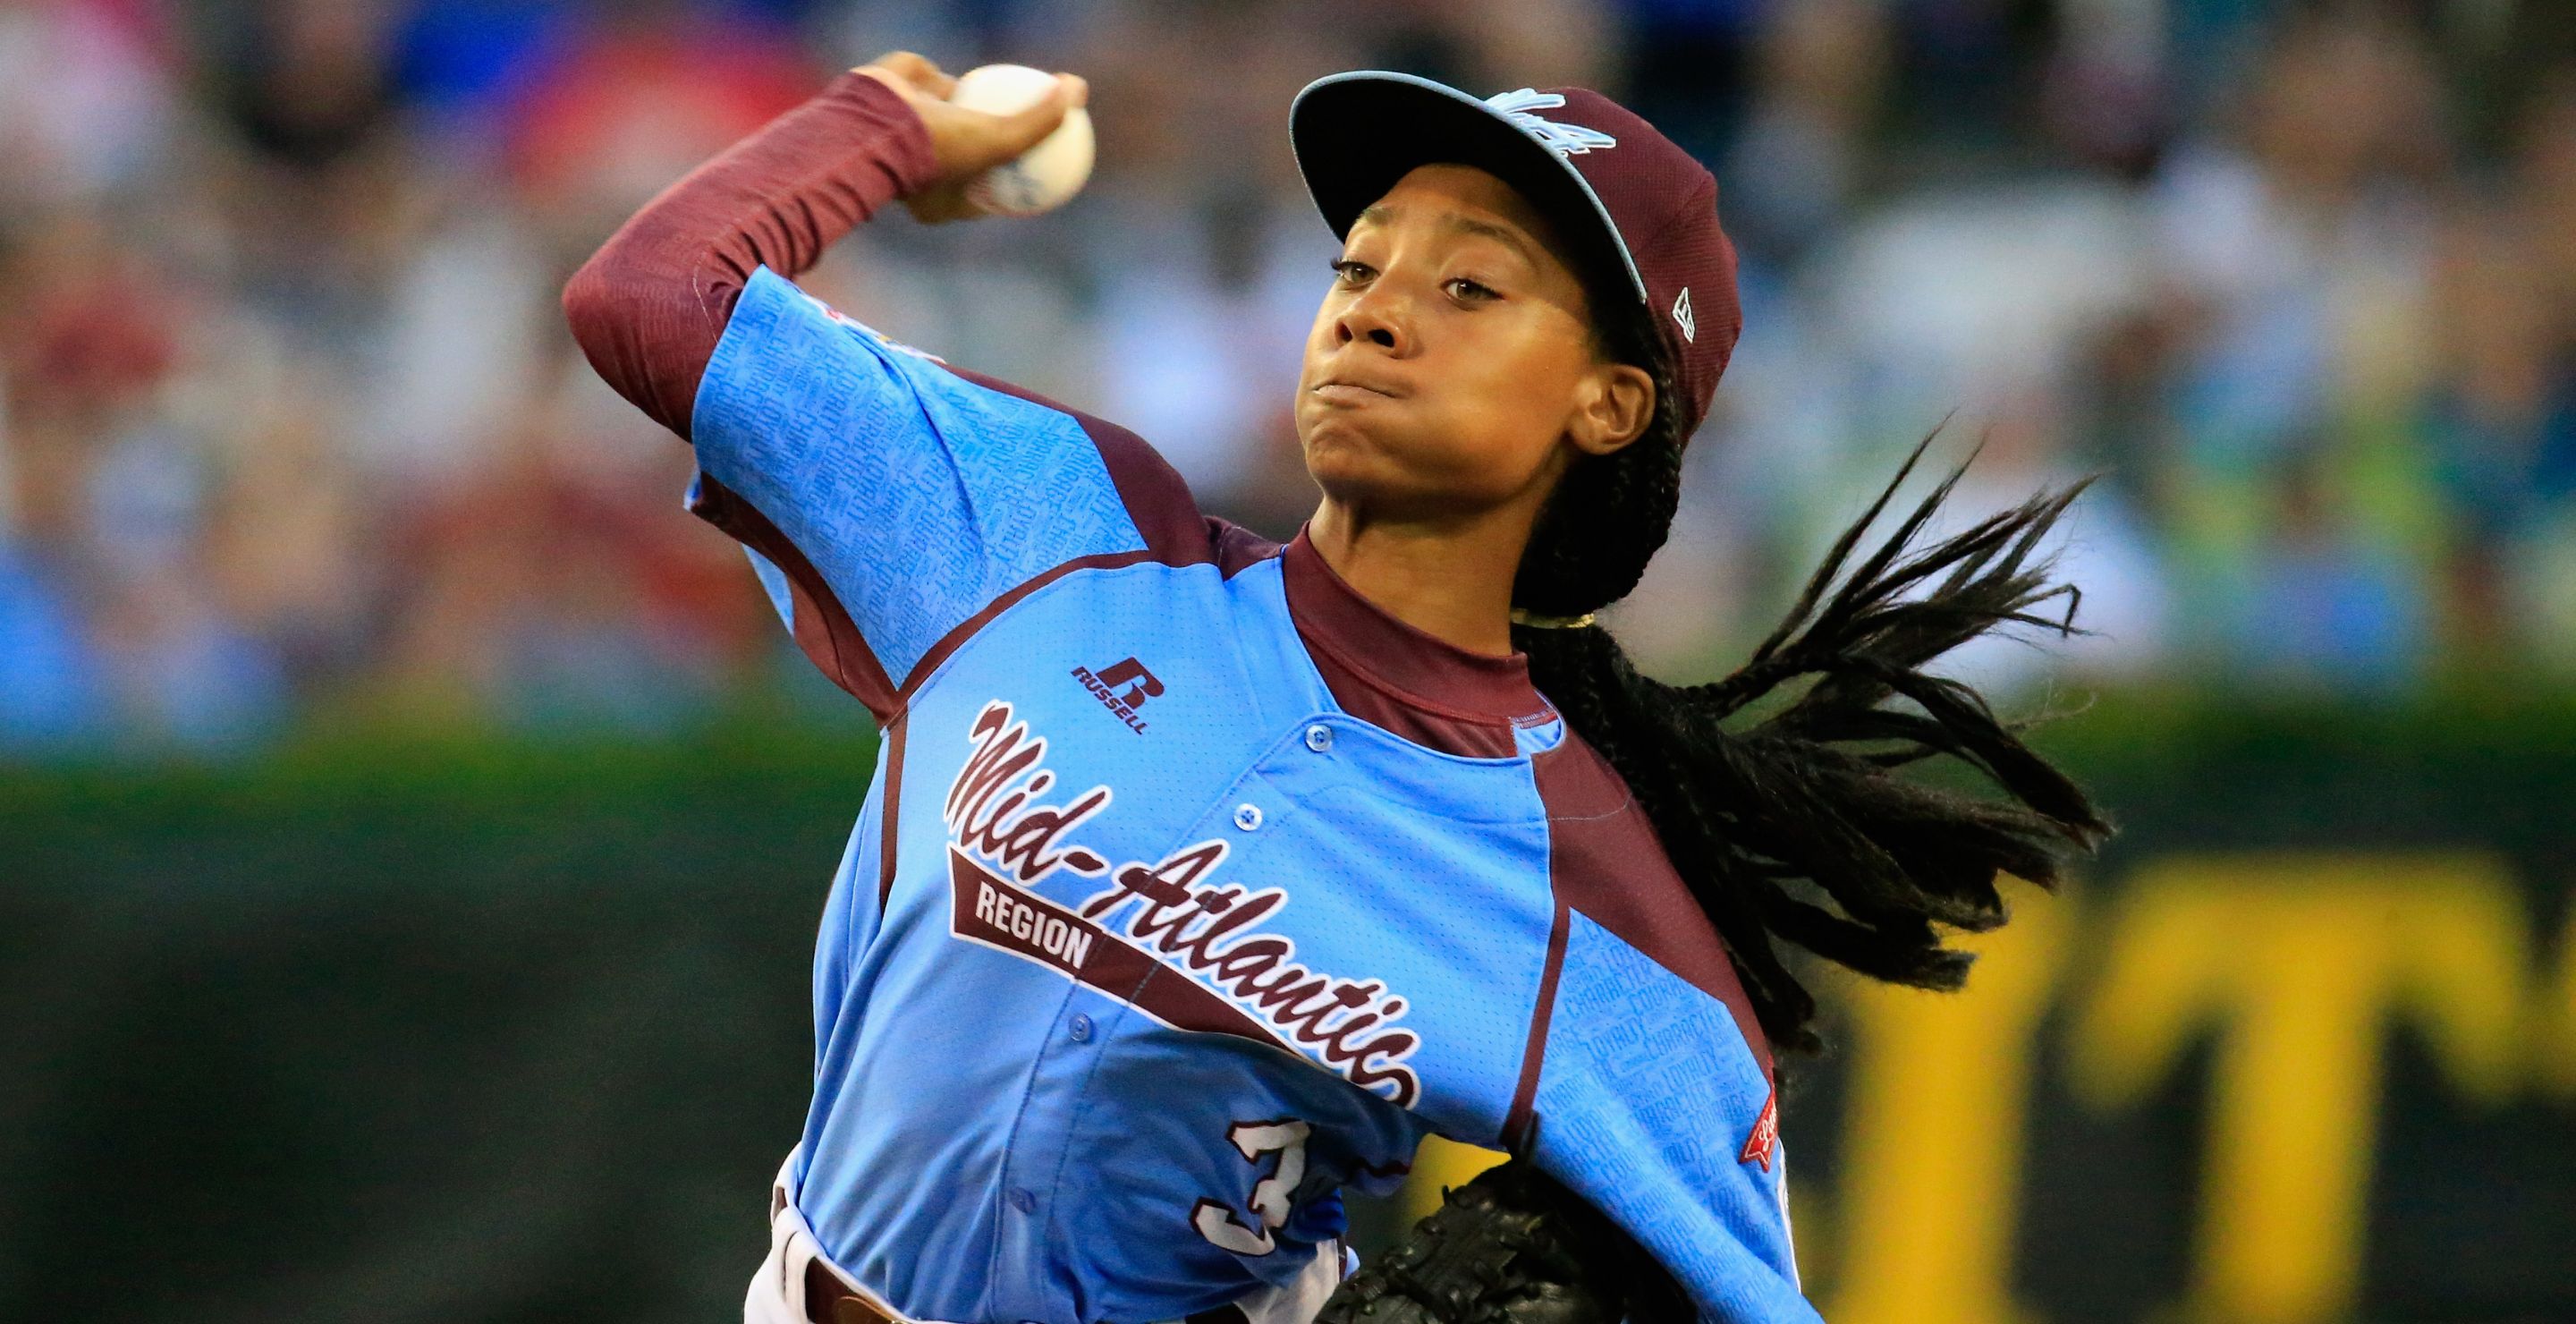 Mo'ne Daivs pitches in the LLWS.